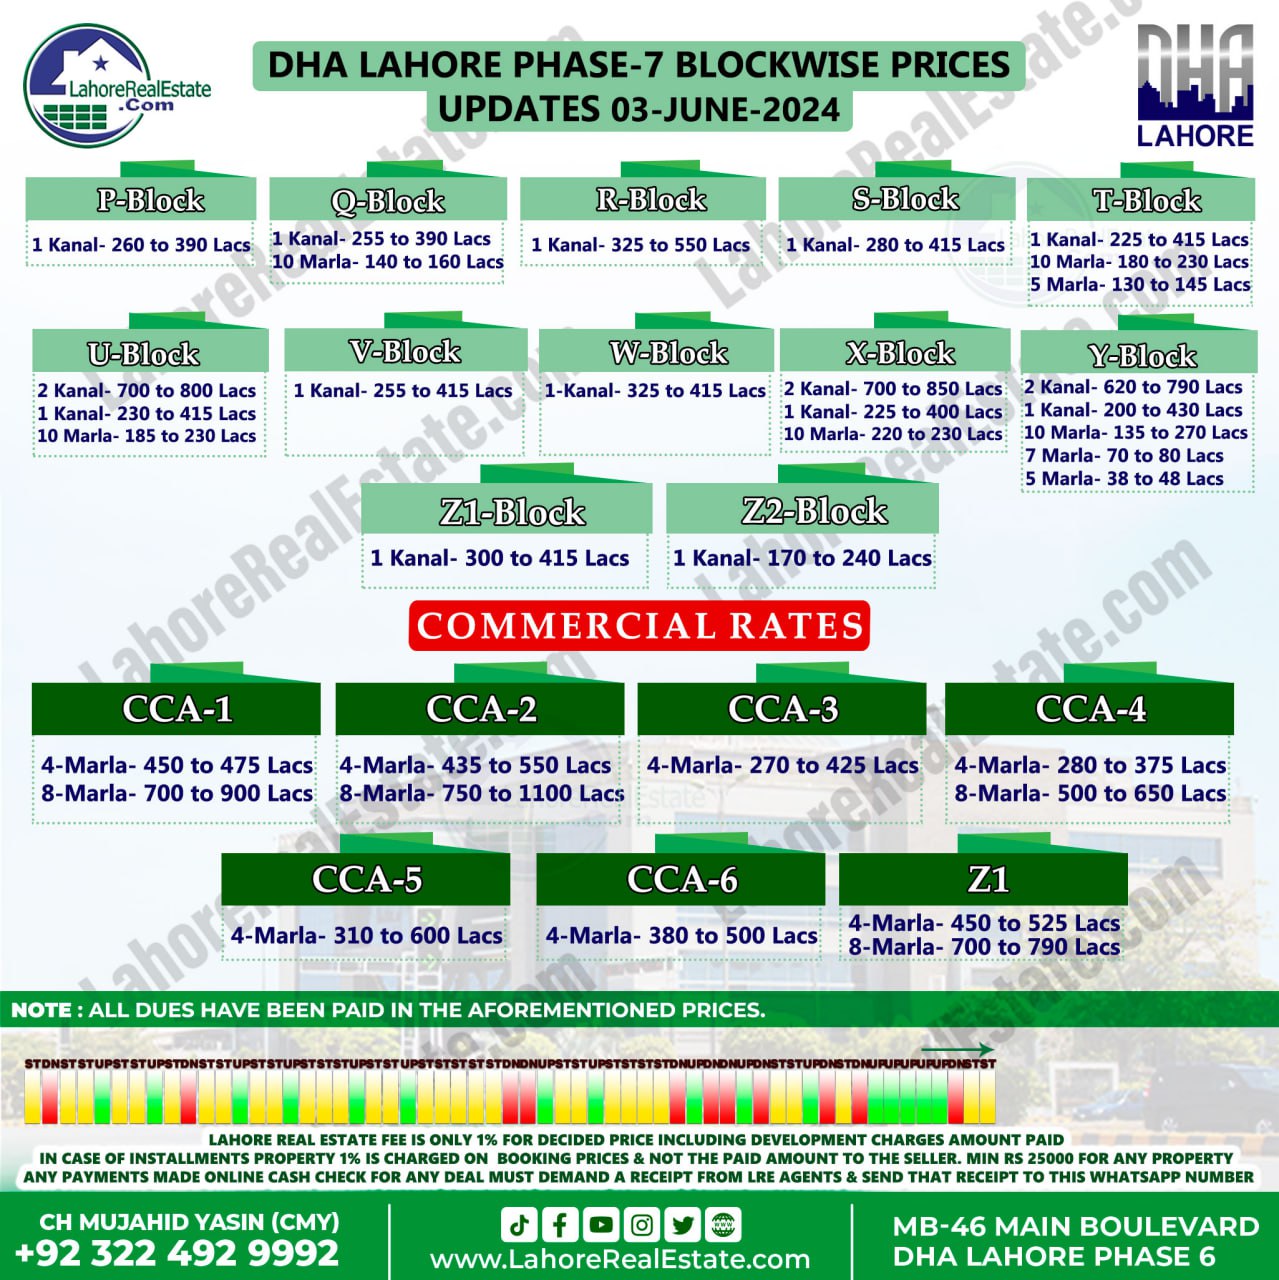 DHA Lahore Phase 7 Plot Prices Blockwise Rates June 04, 2024